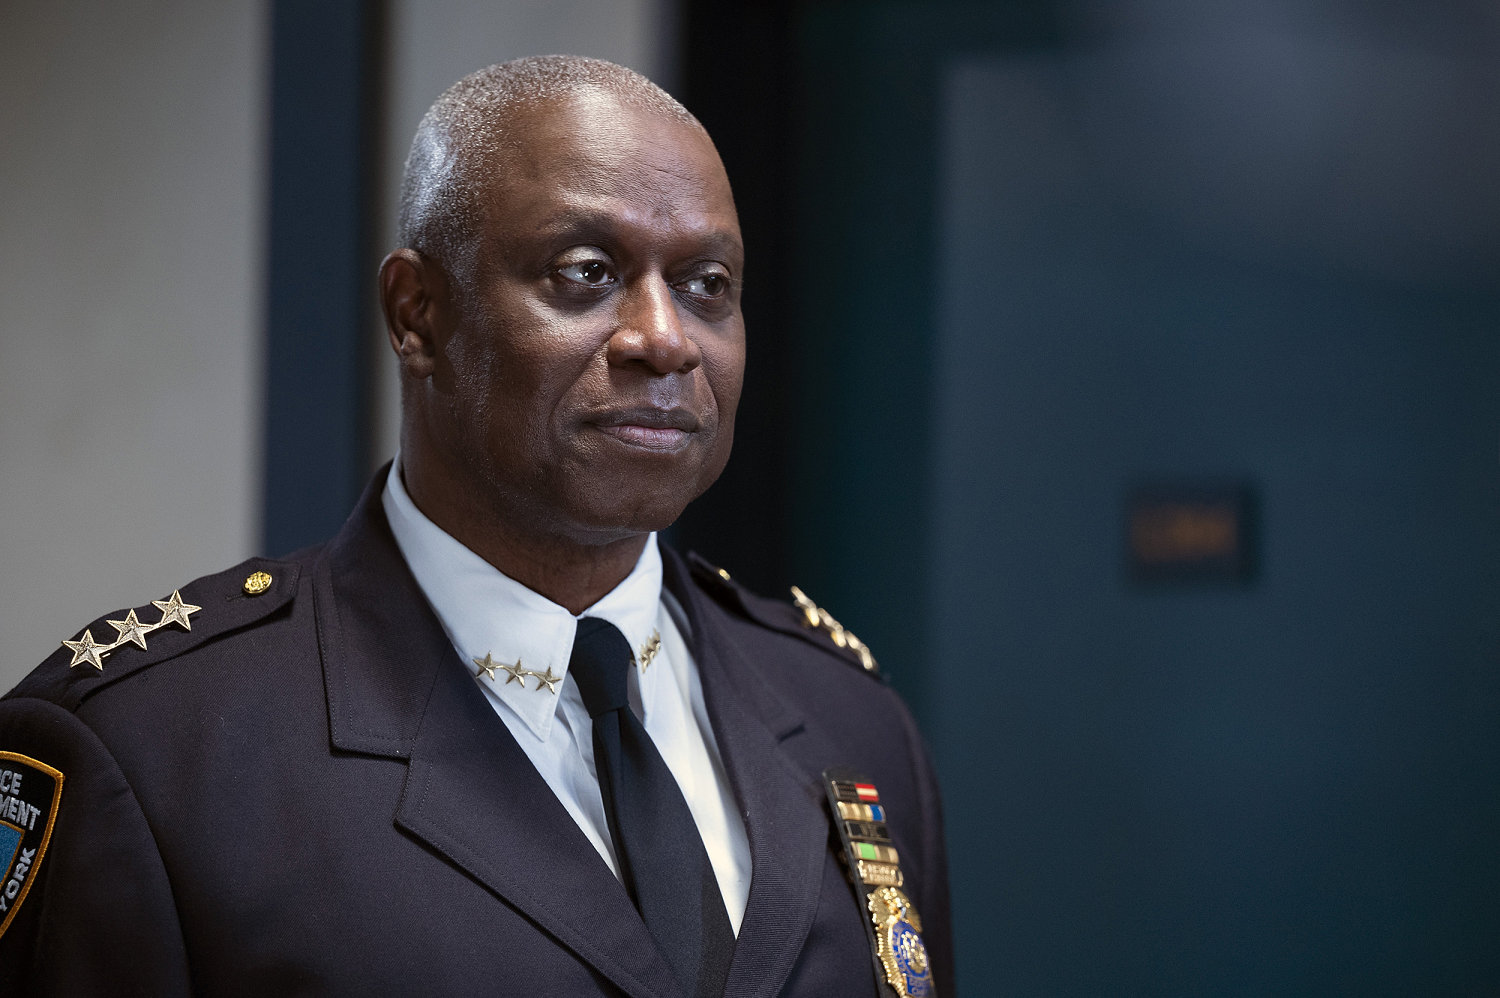 Andre Braugher, ‘Brooklyn Nine-Nine’ and ‘Homicide’ actor, died from lung cancer, spokesperson says